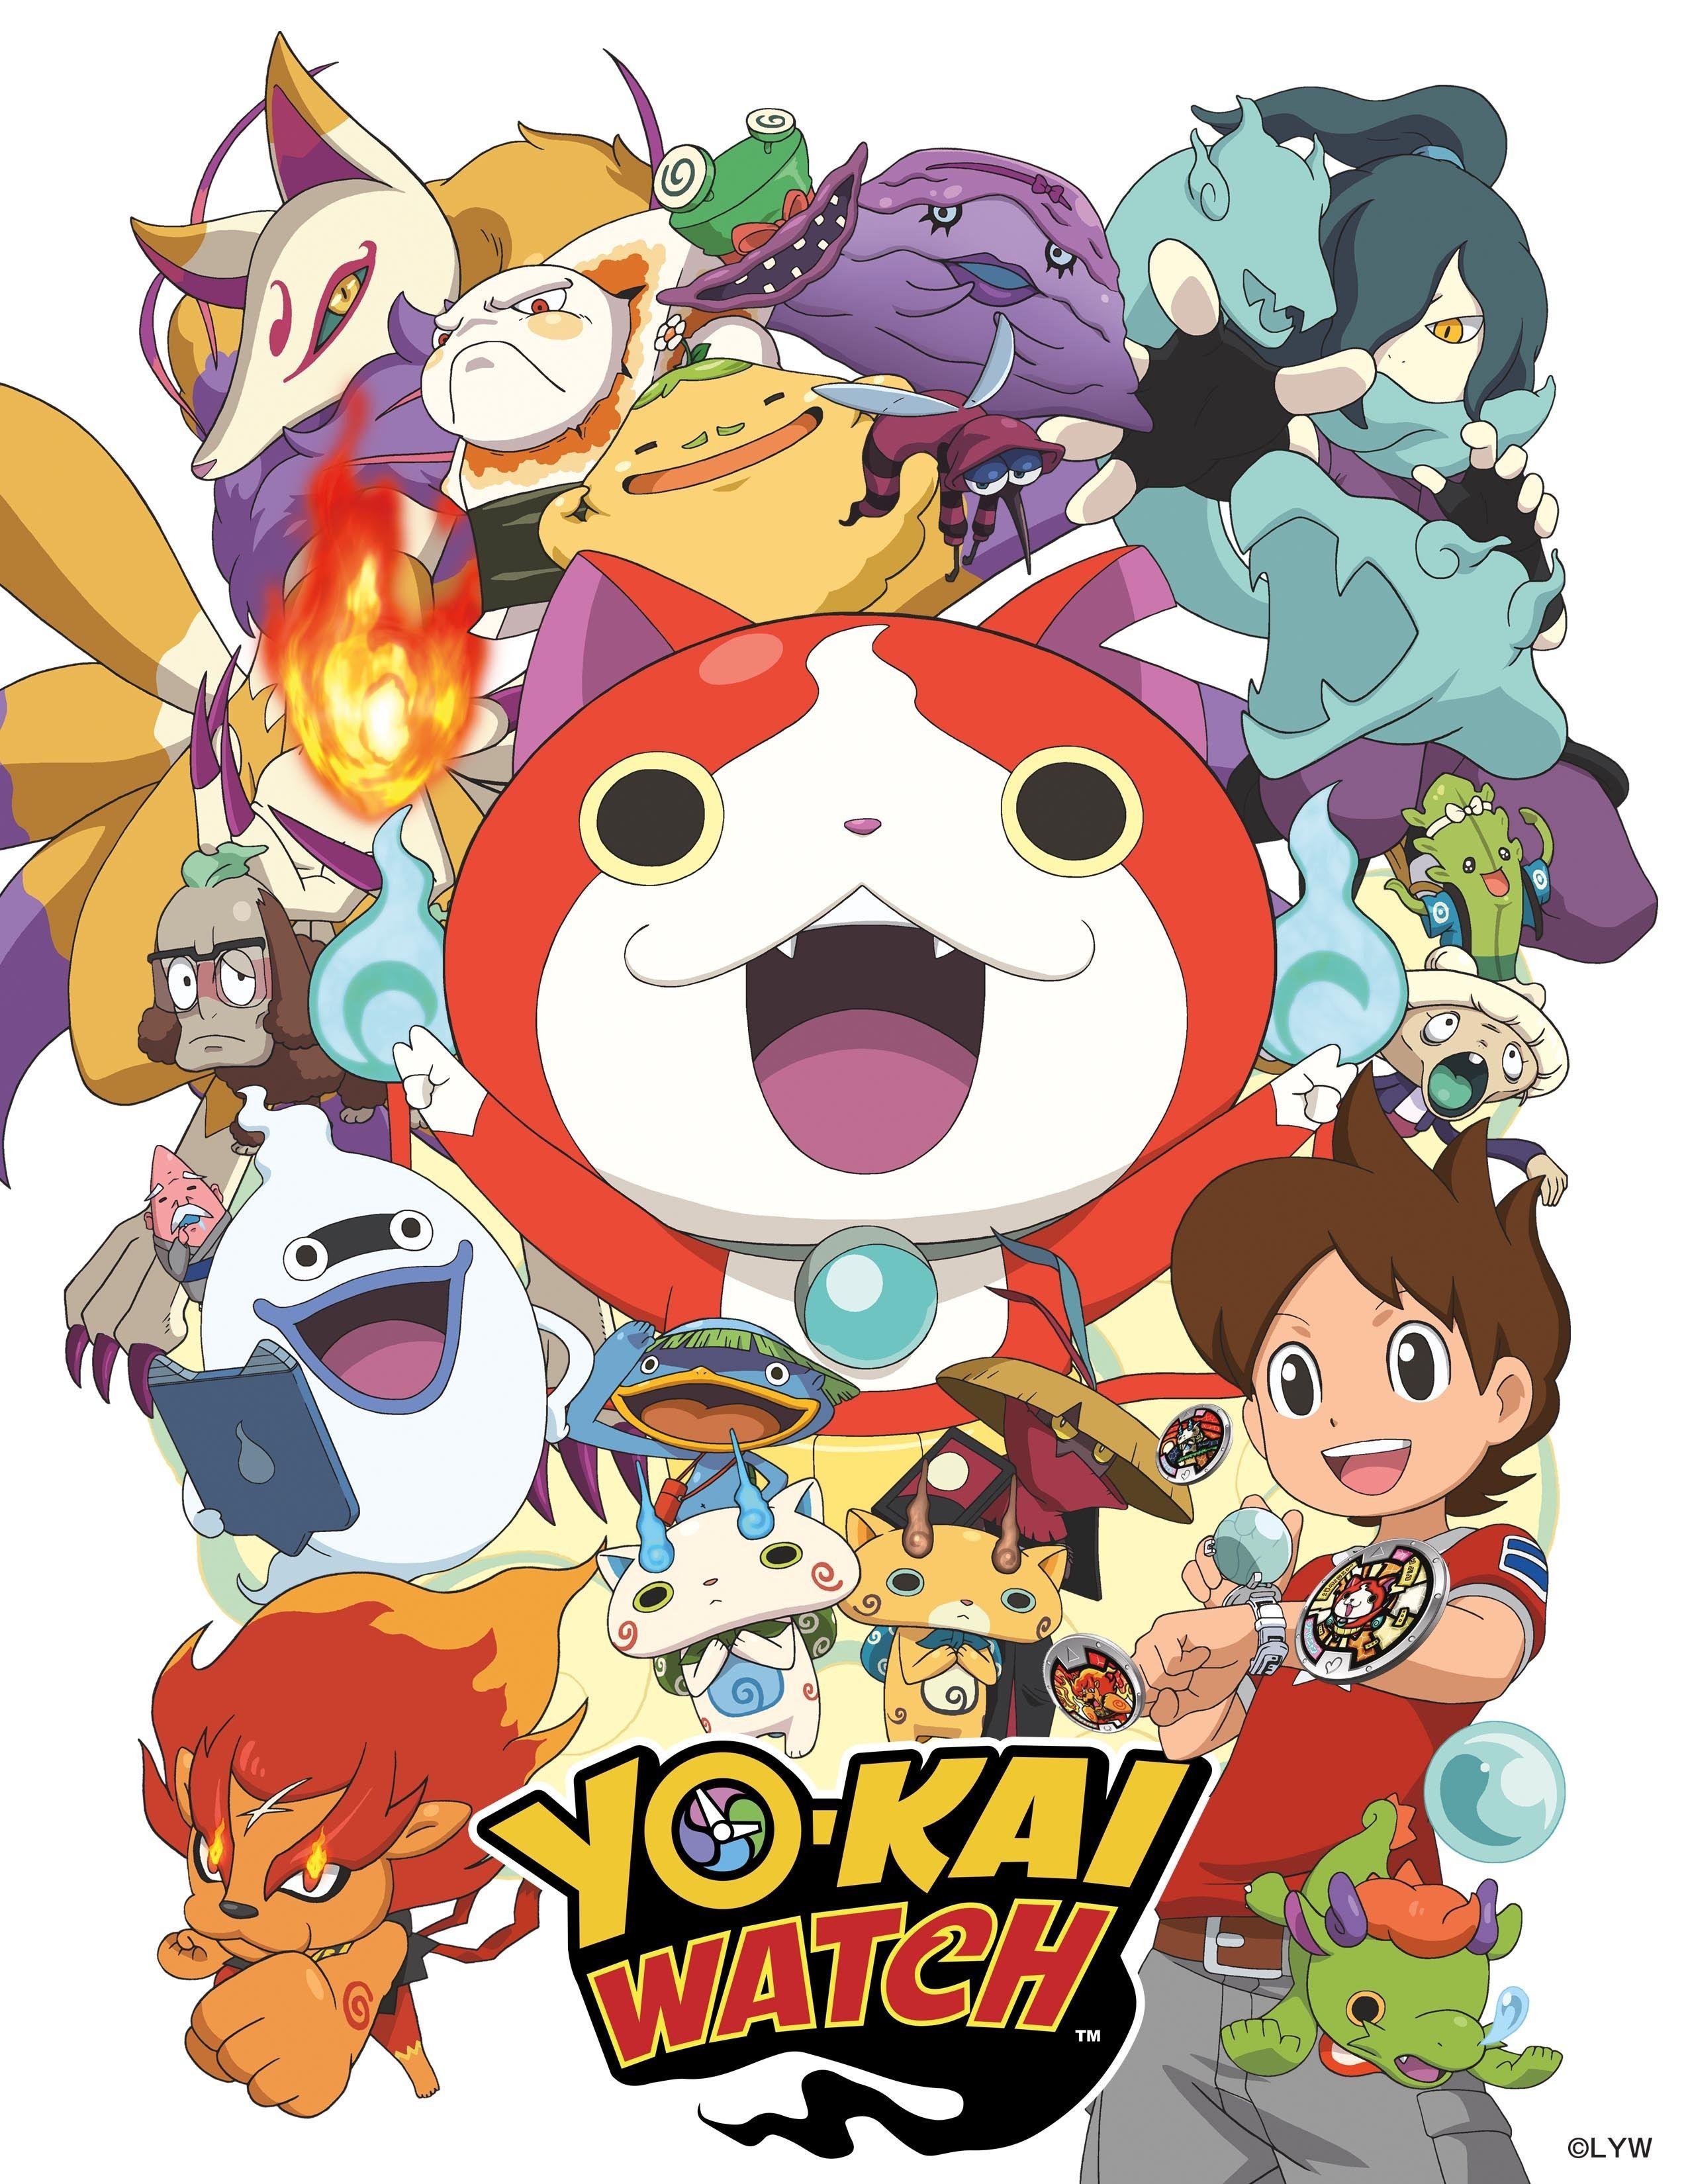 What Christians Need To Know About Yo Kai Watch. Under